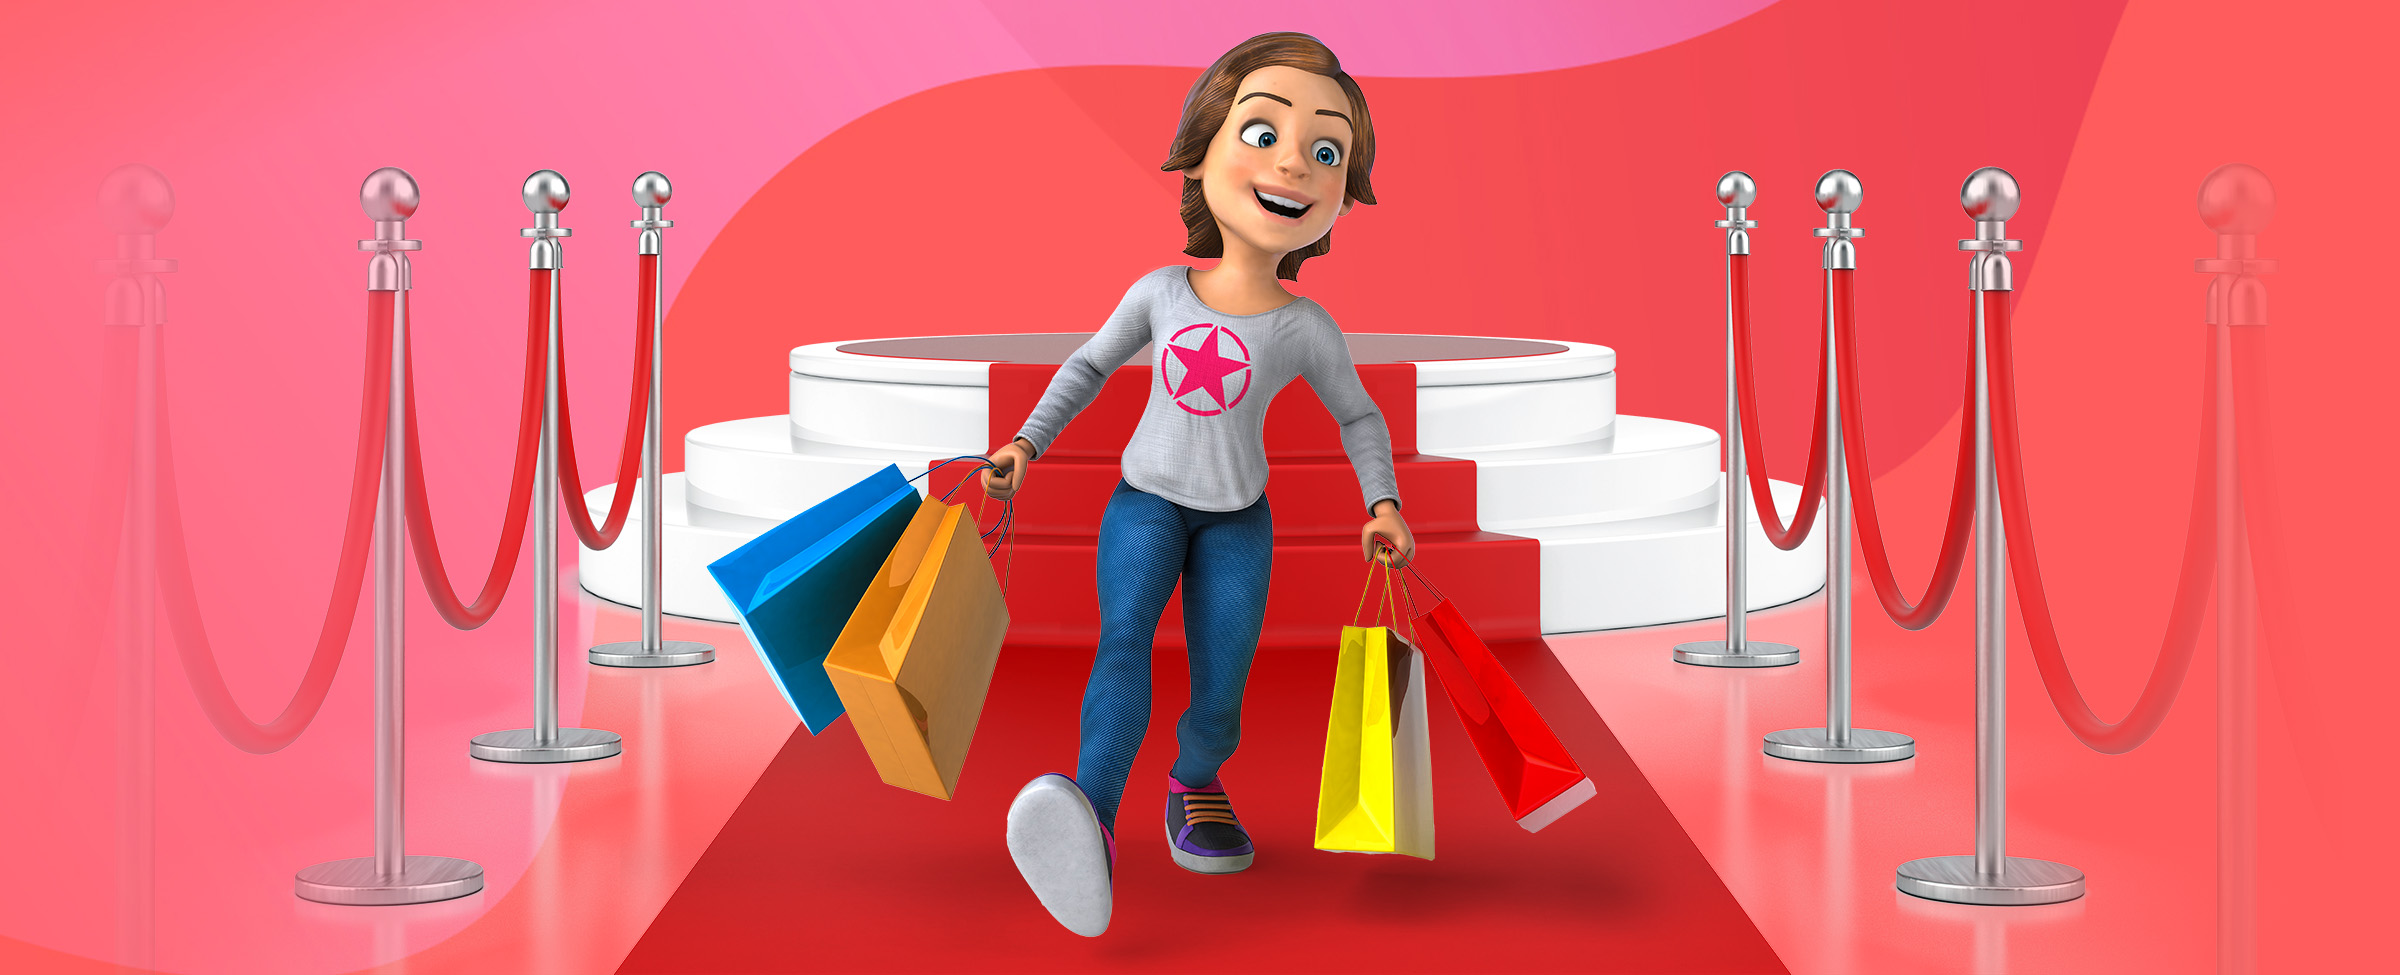 A 3D-animated woman walks down a red carpet flanked by roped-off silver poles. With arms outstretched, she is holding two shopping bags in each hand in bright colors including blue, orange, red and yellow. Behind her, the red carpet leads to a three-tiered white platform, while in the distance is an abstract pink multi-toned background.